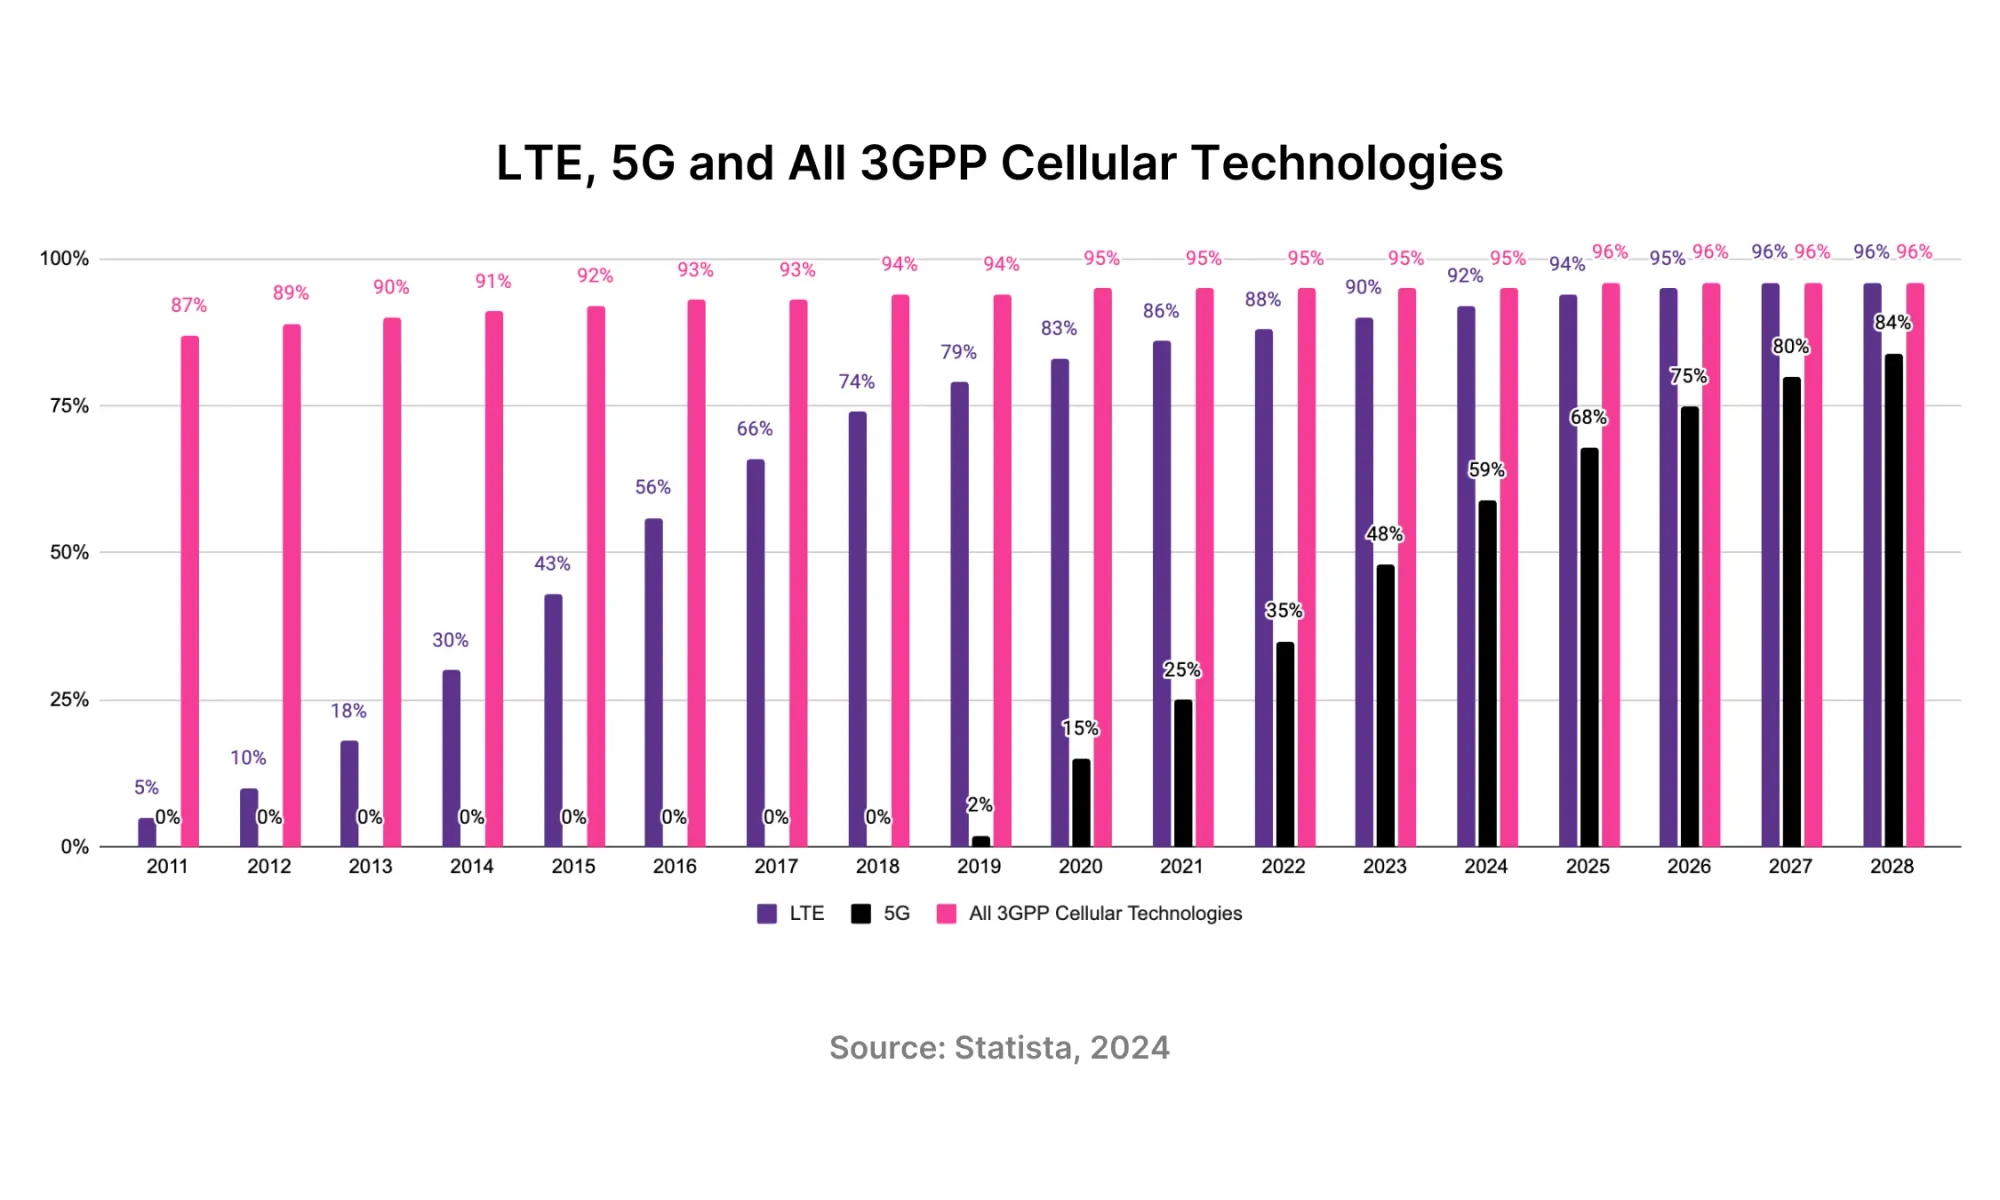 LTE, 5G and All 3GPP Cellular Technologies